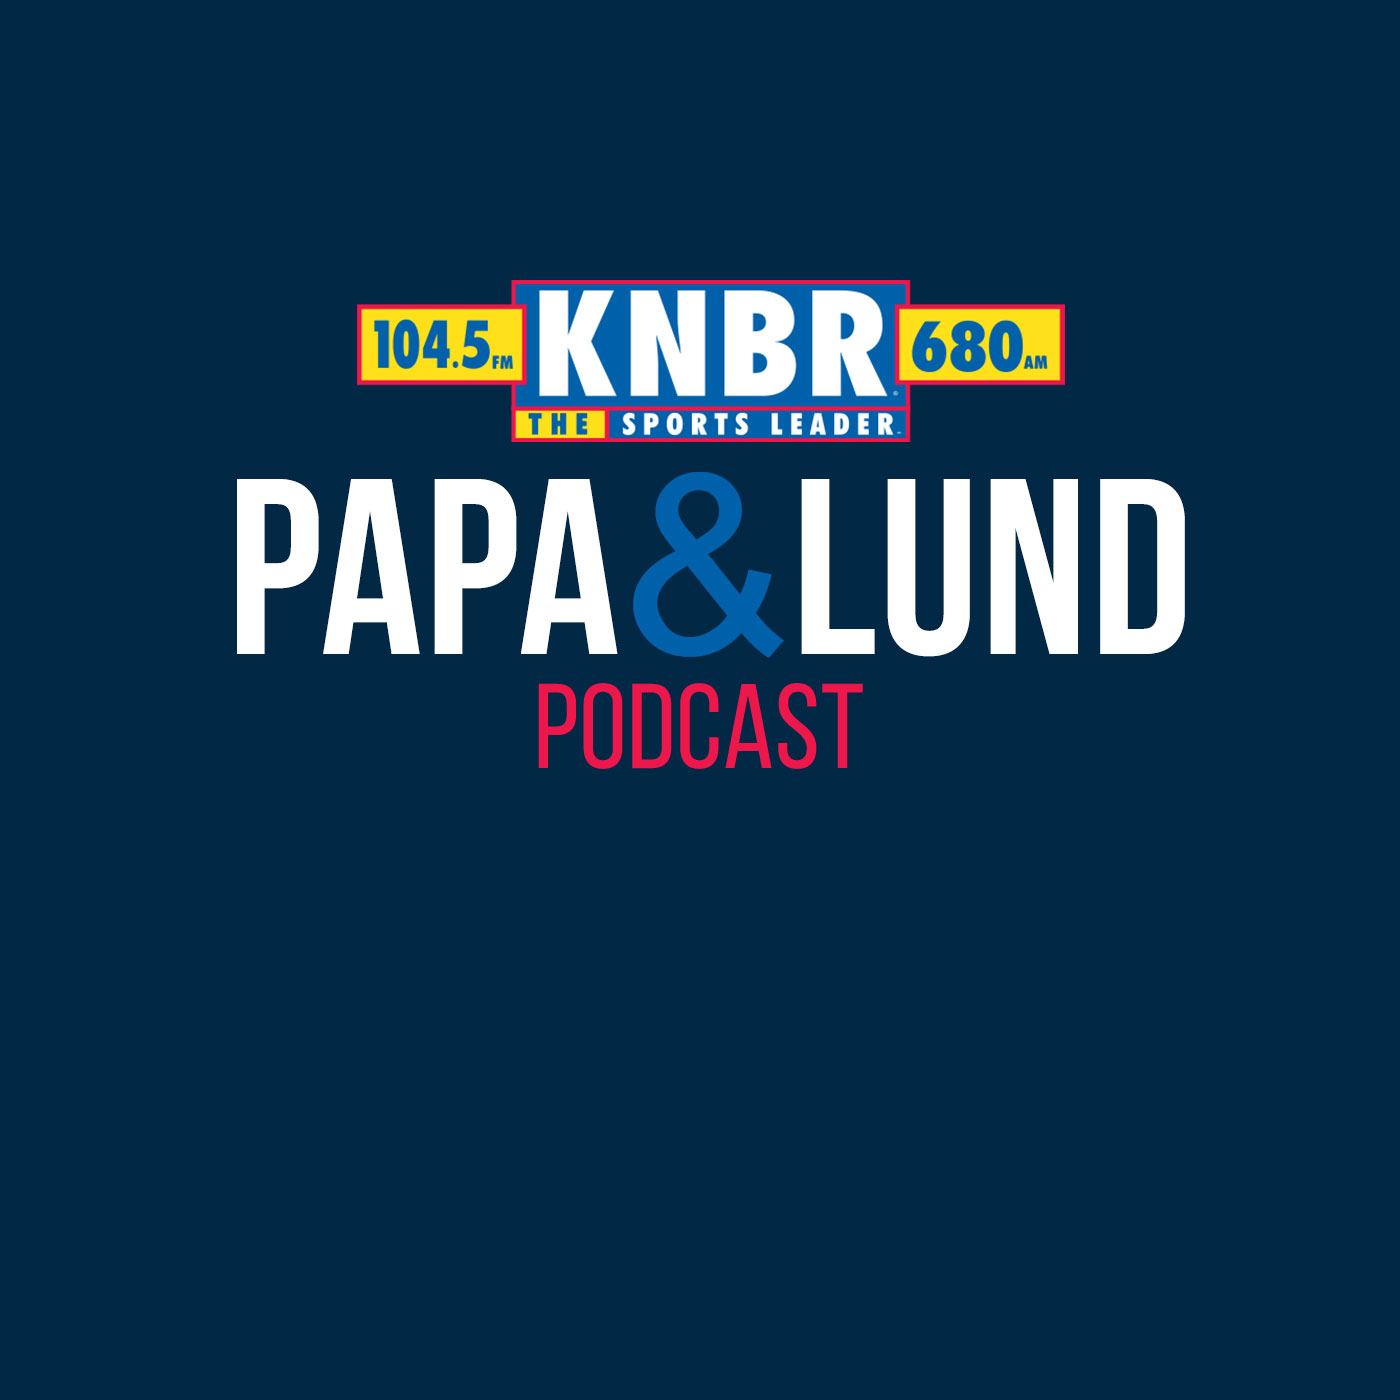 11-10 Giant's Hall of Fame broadcaster, Jon Miller joins Papa & Lund